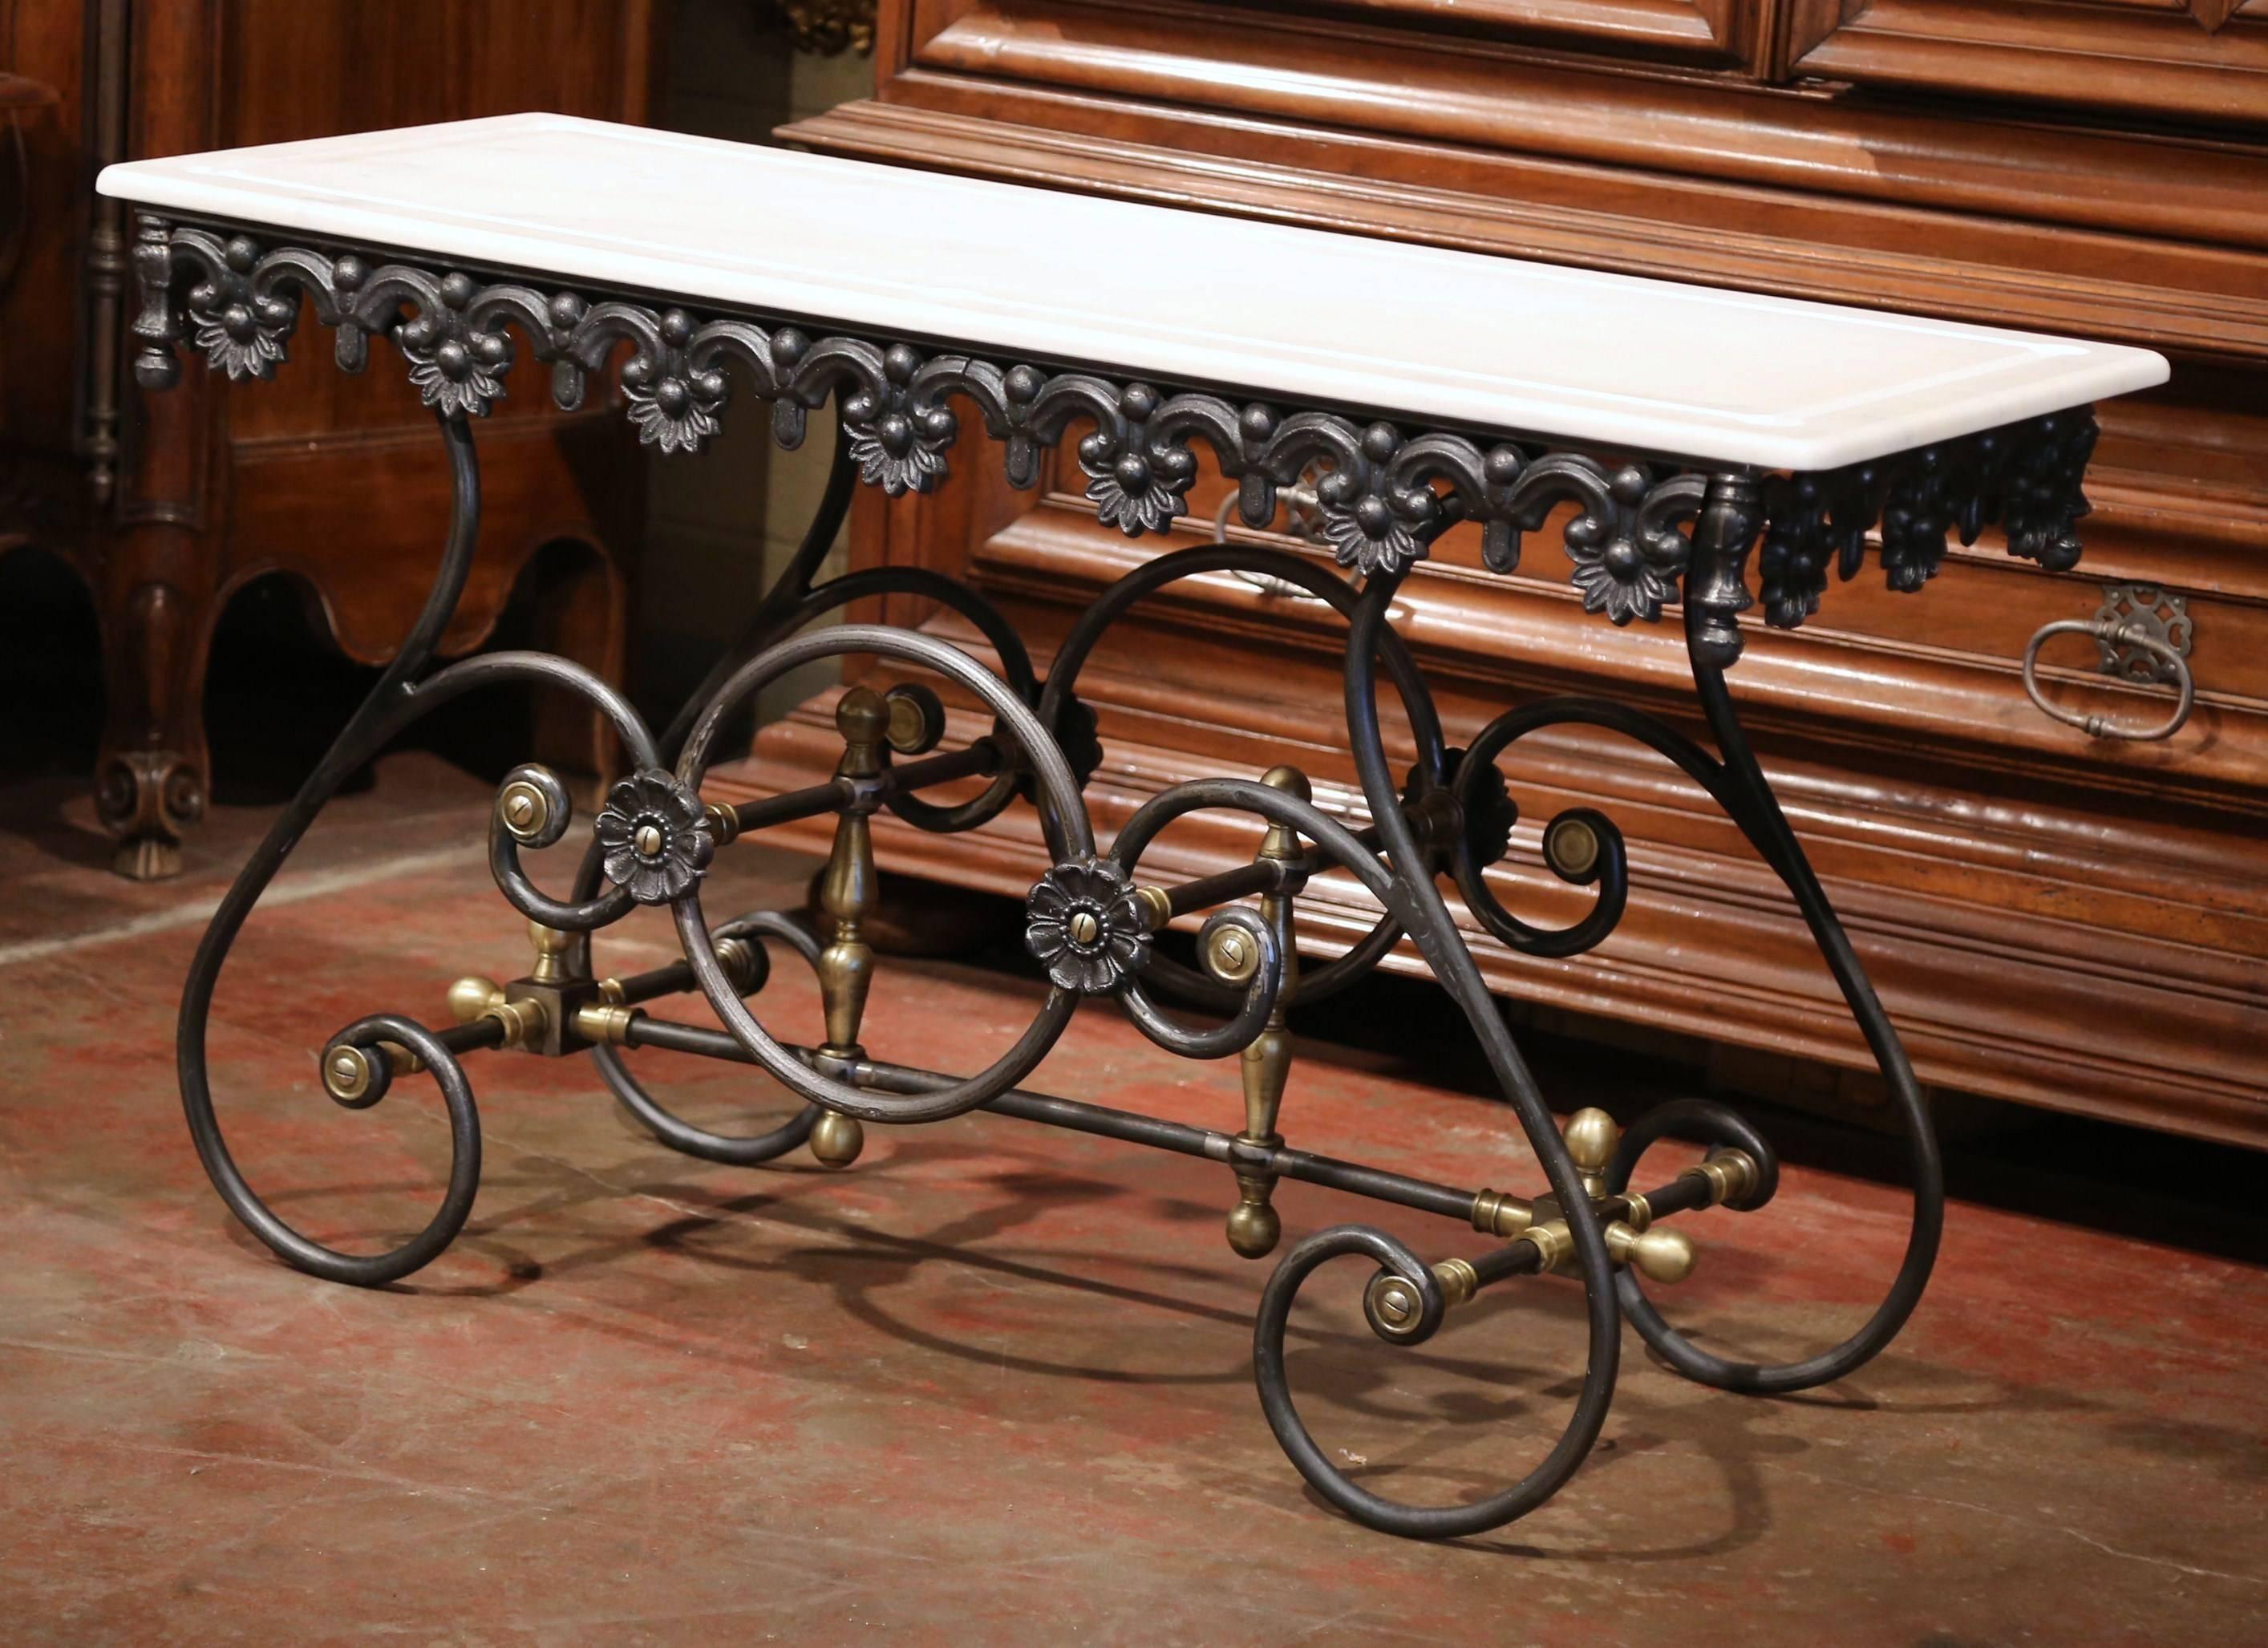 Contemporary Polished Iron Butcher Pastry Table with Marble Top and Brass Finials from France